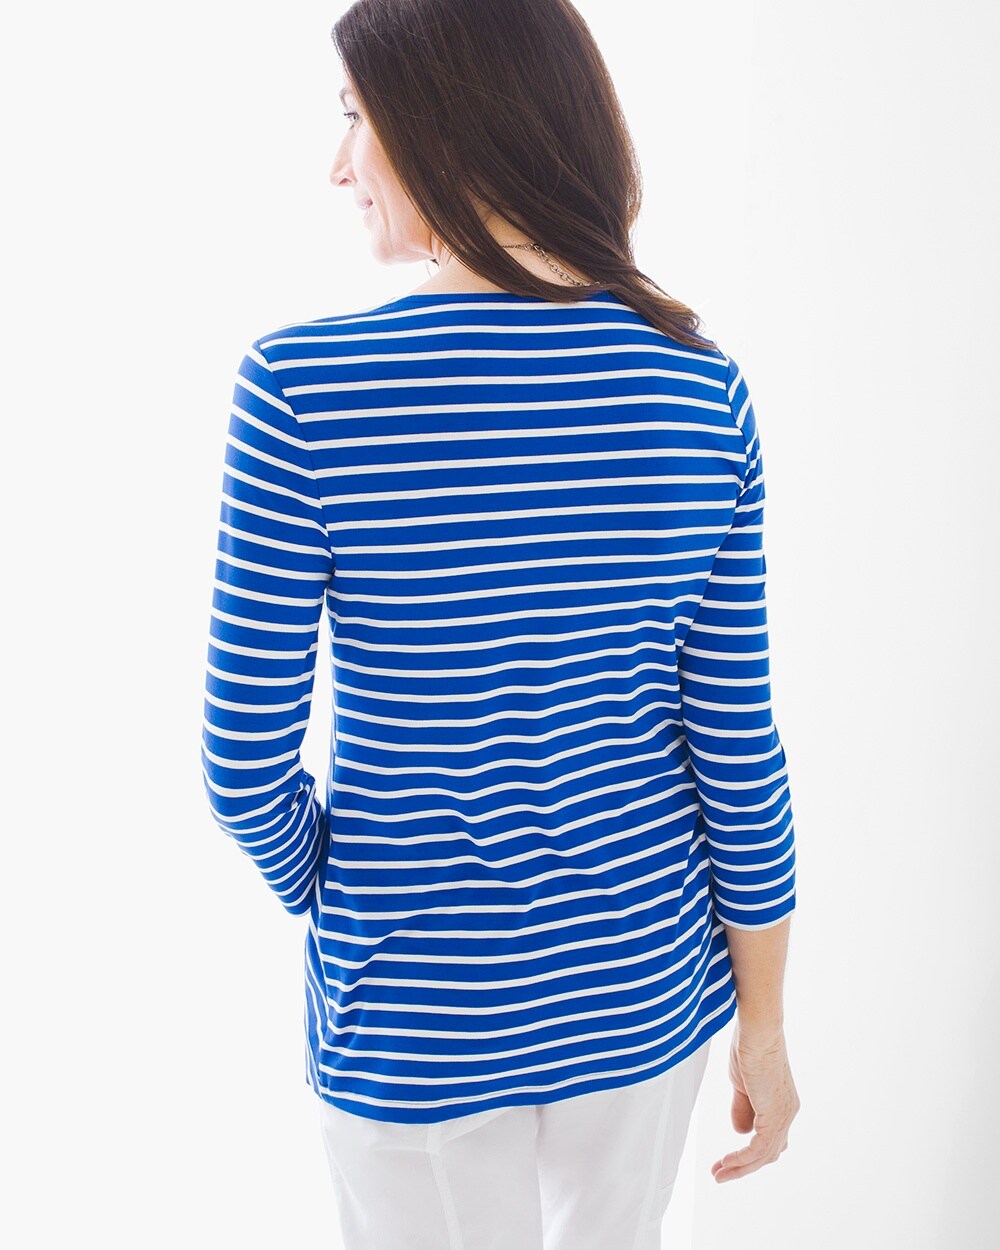 Miraculous Stripe Tiered Top - Chico's